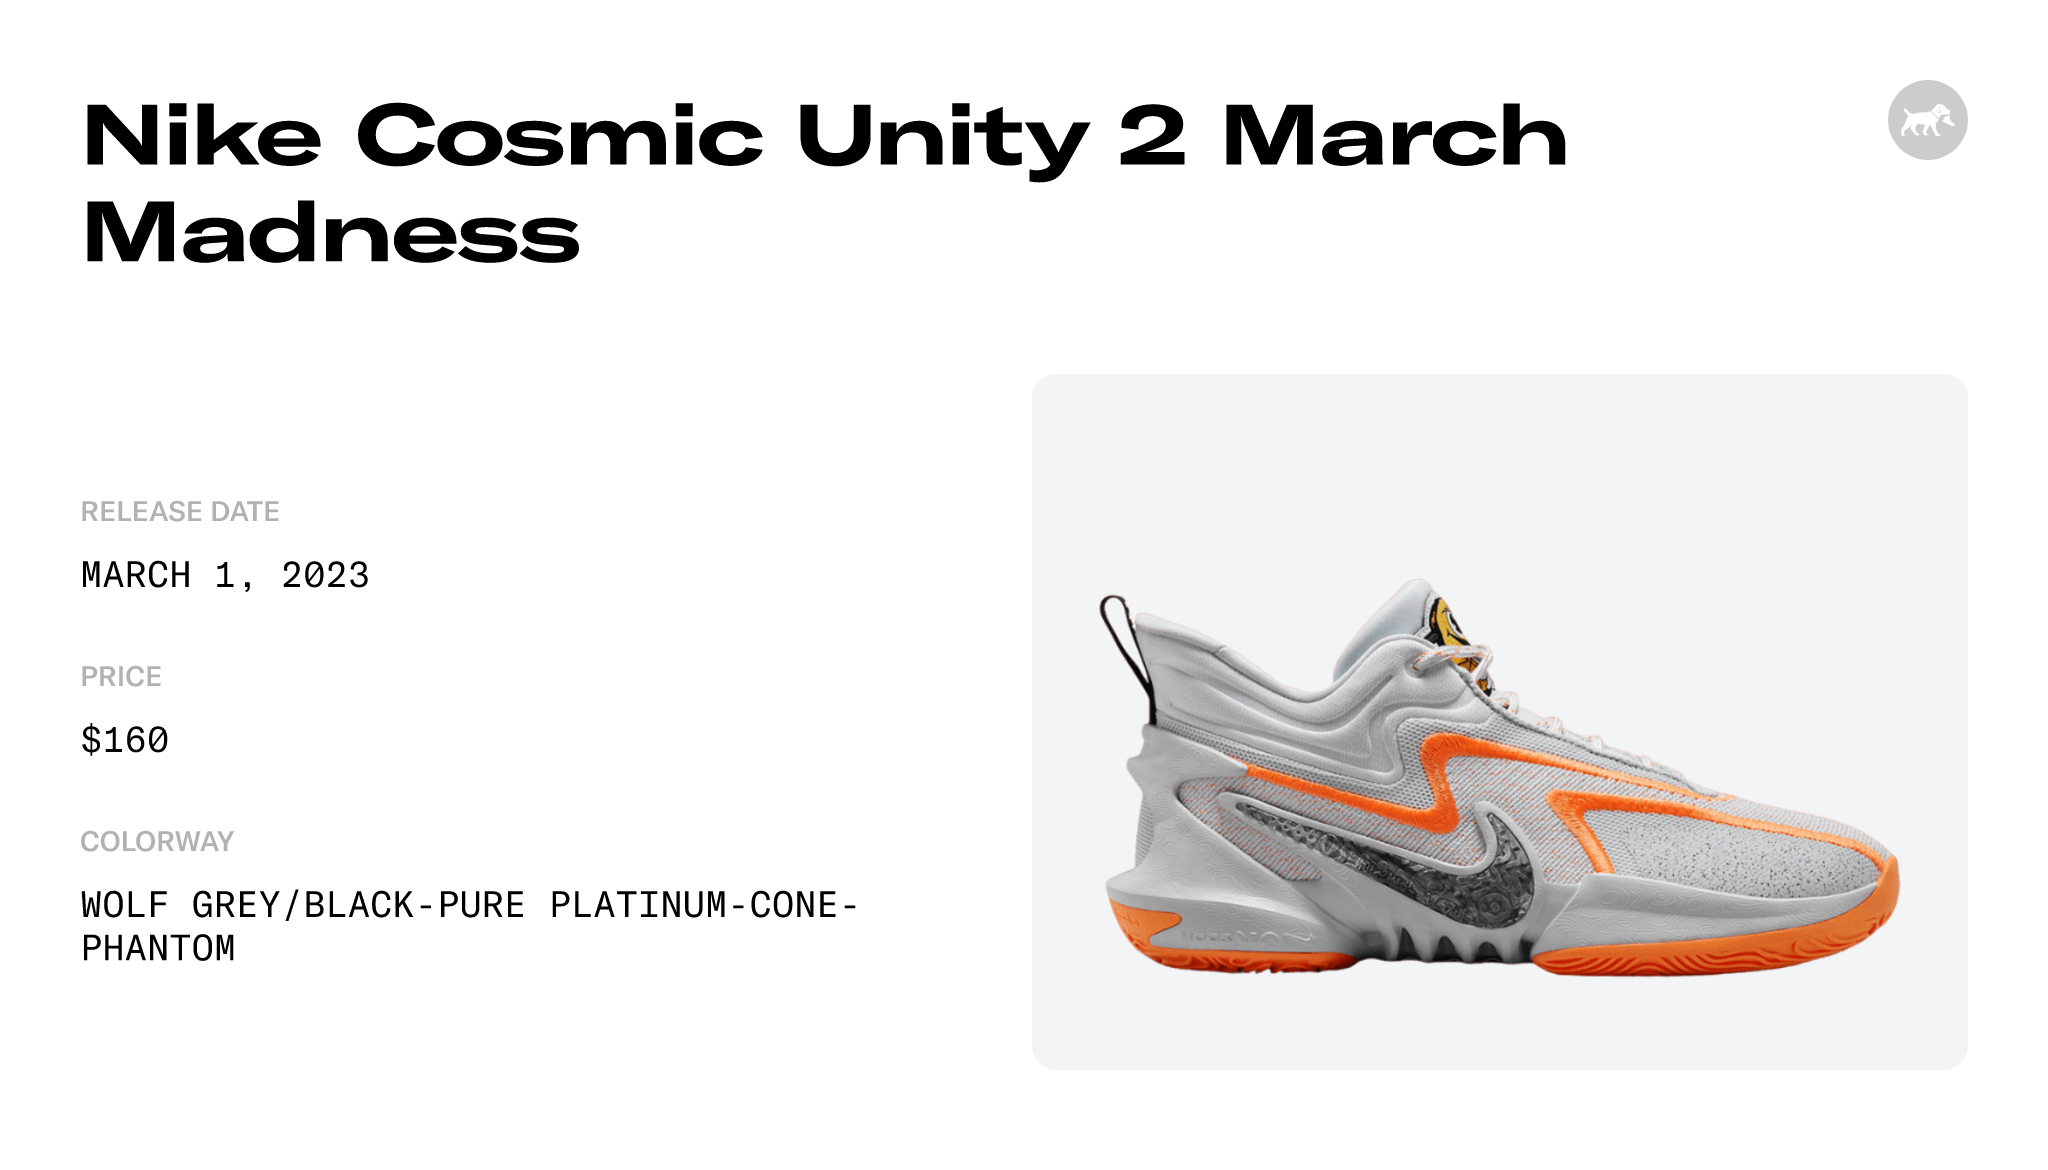 Nike Cosmic Unity 2 March Madness - DH1537-004 Raffles and Release Date